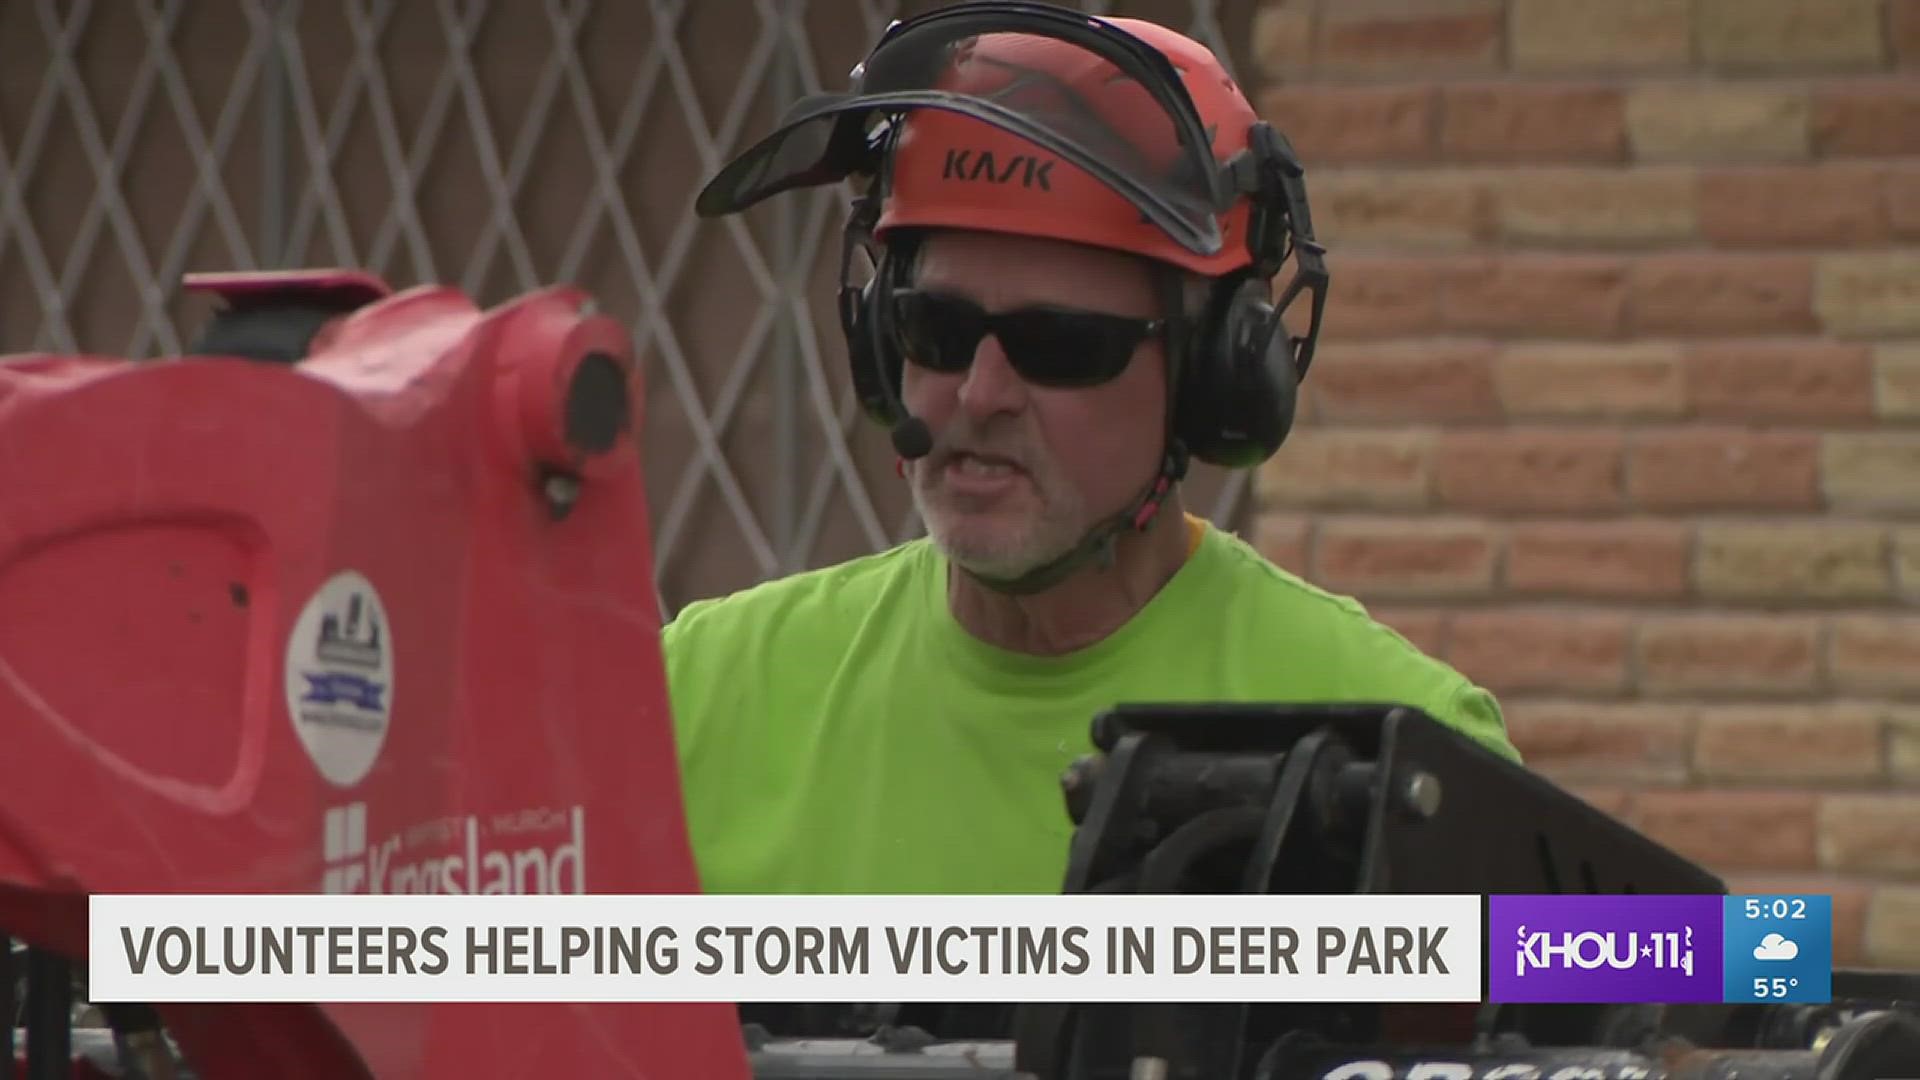 On Friday, teams from one of the largest disaster relief groups in Texas were on the ground in Deer Park after a tornado tore through the community on Tuesday.